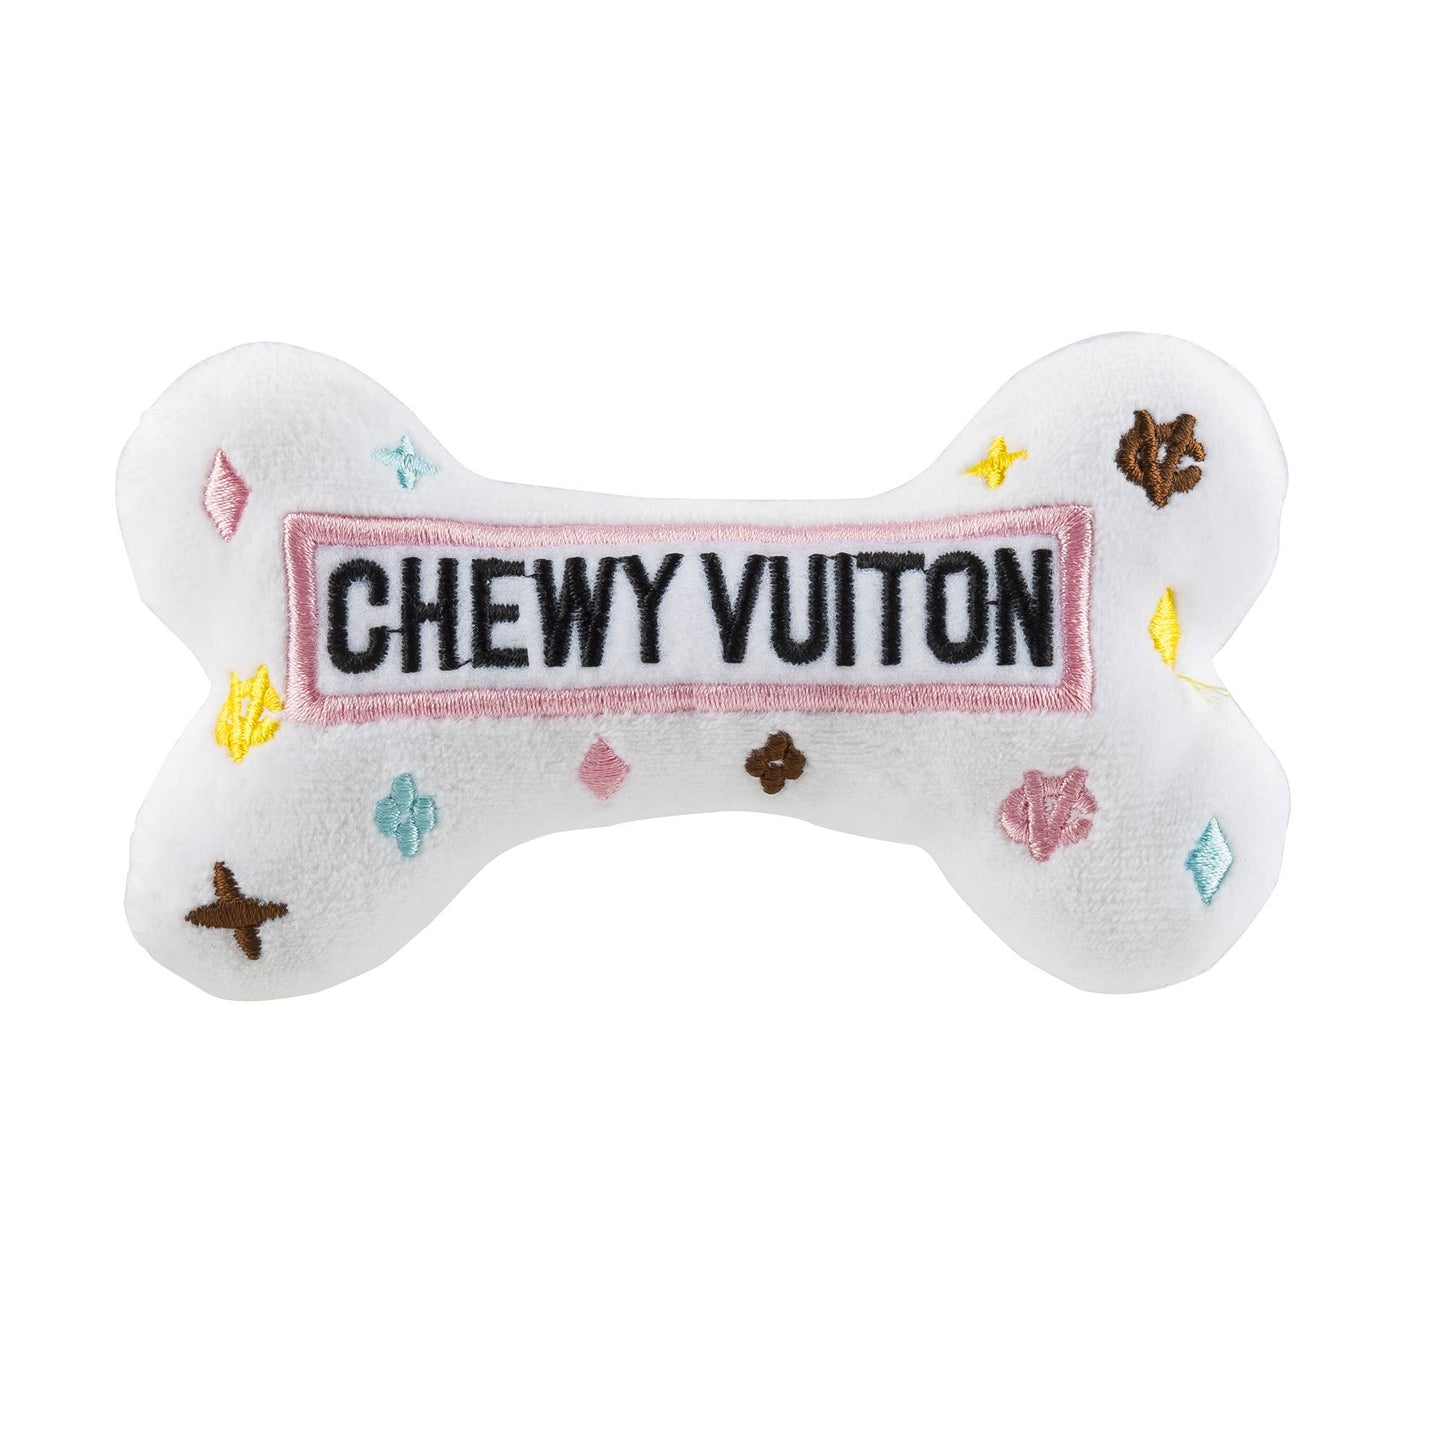 white chewy vuiton bones squeaker dog toy small